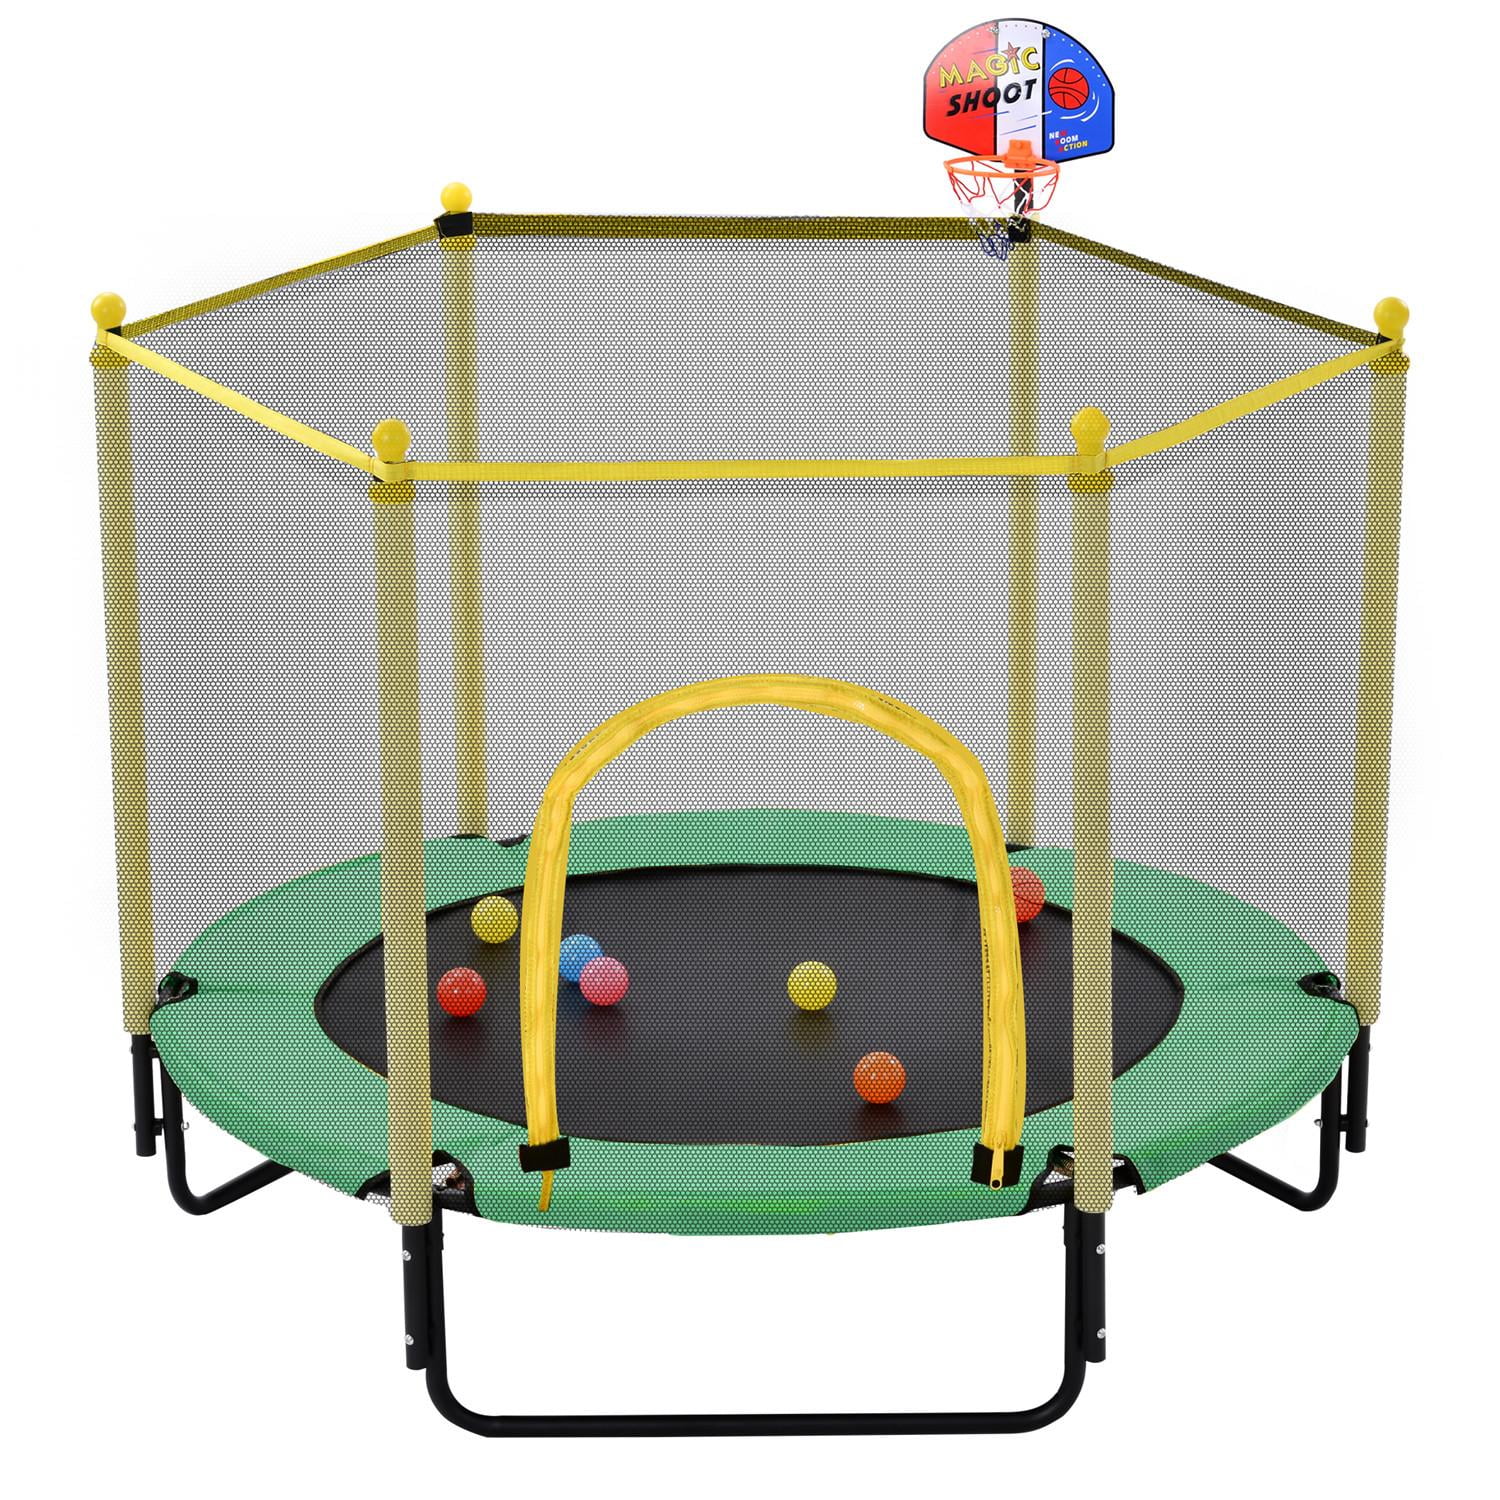 5ft Kids Trampoline with Safety Enclosure Net, Stainless Steel Outdoor Indoor Mini Recreational Trampoline for Toddlers Boys Girls Birthday Gift, Green Yellow